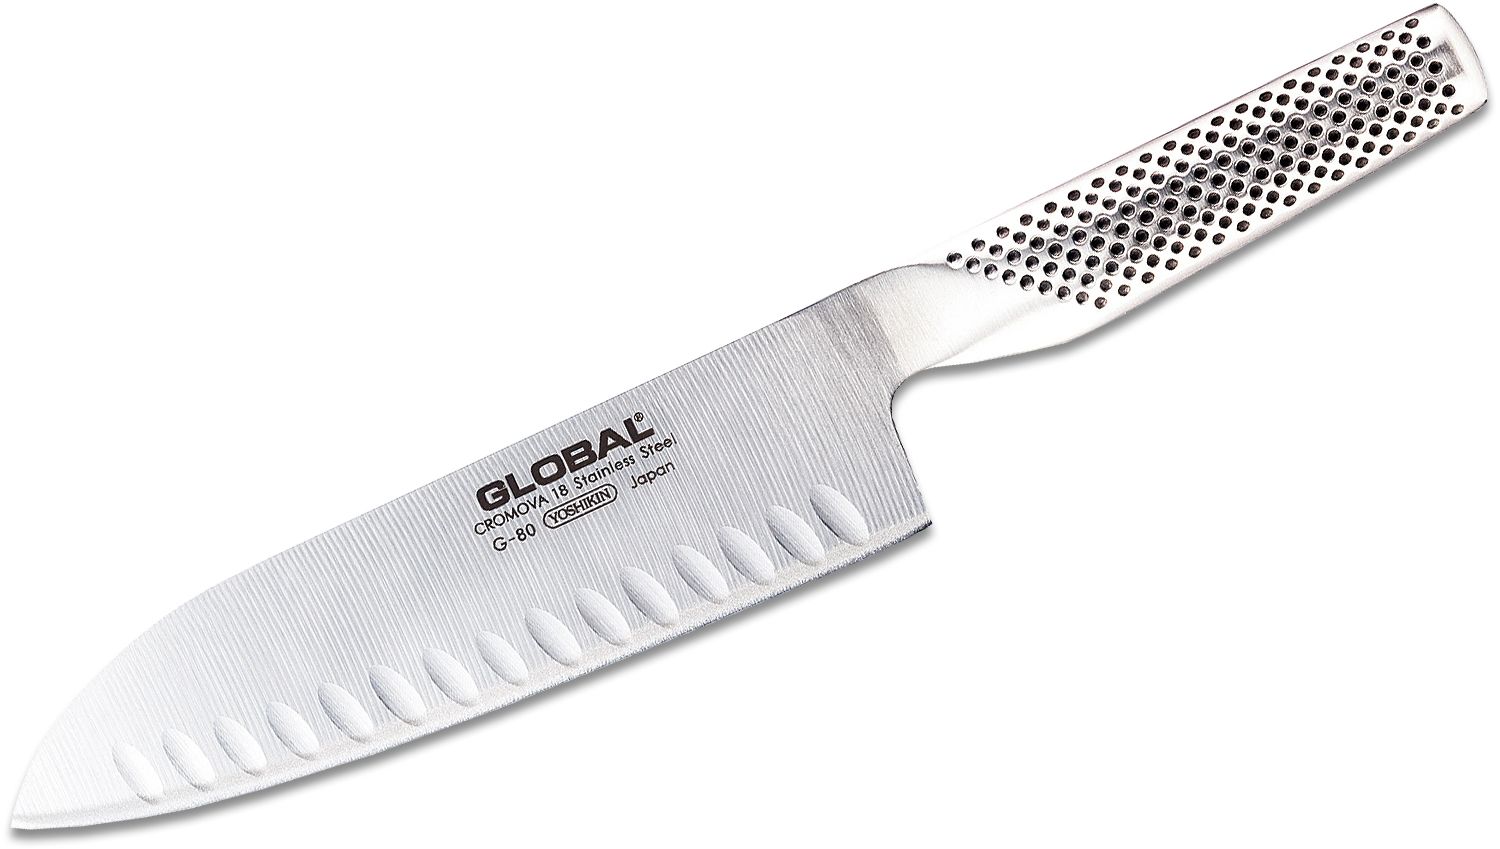 Global 7-inch Stainless Steel Chef's Knife